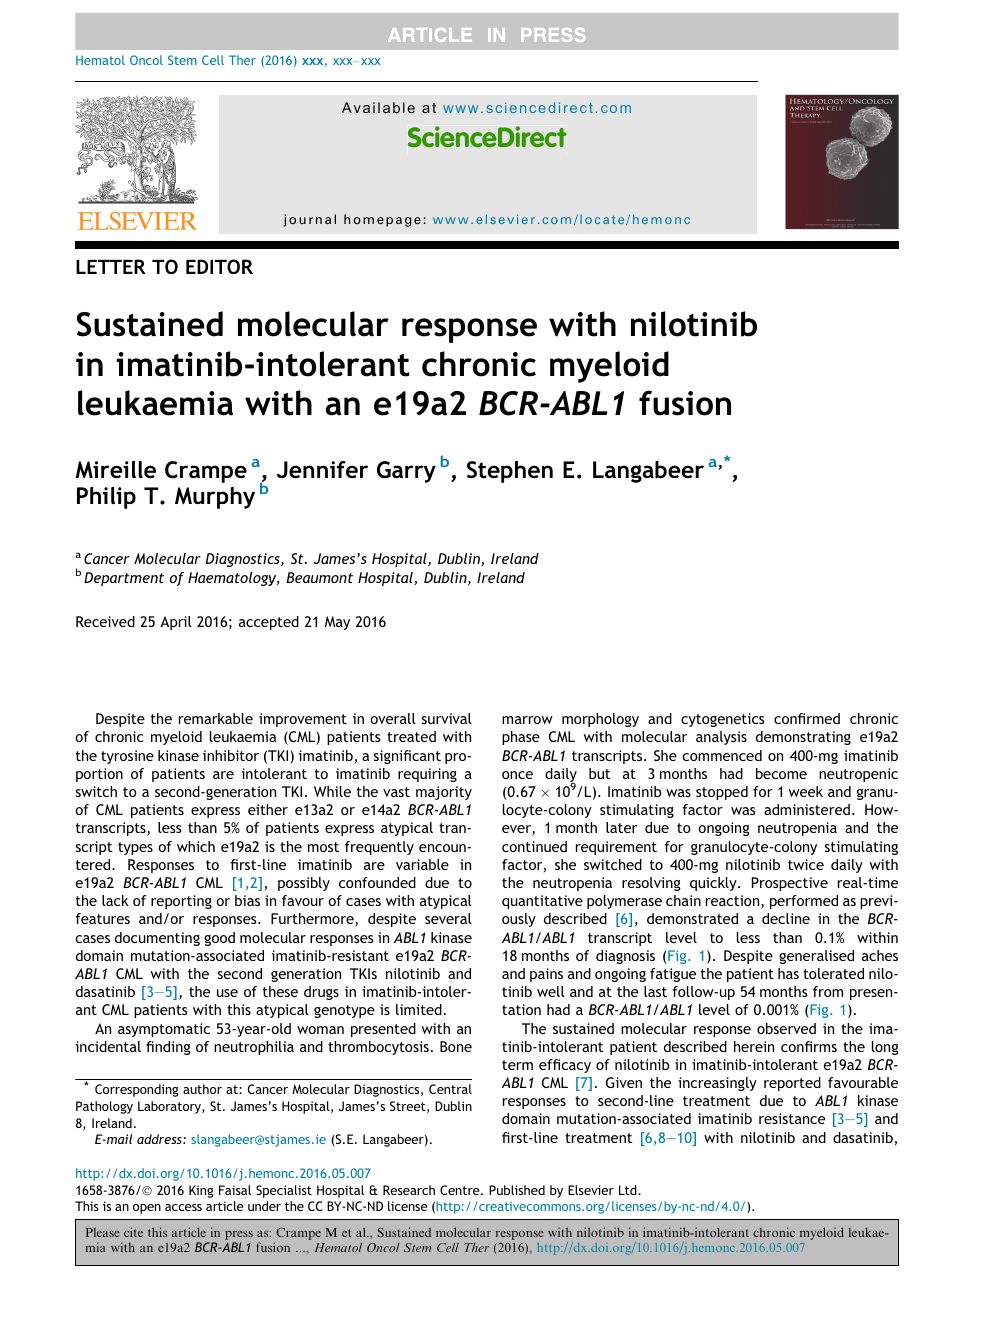 Sustained Molecular Response With Nilotinib In Imatinib Intolerant Chronic Myeloid Leukaemia With An E19a2 r Abl1 Fusion Topic Of Research Paper In Clinical Medicine Download Scholarly Article Pdf And Read For Free On